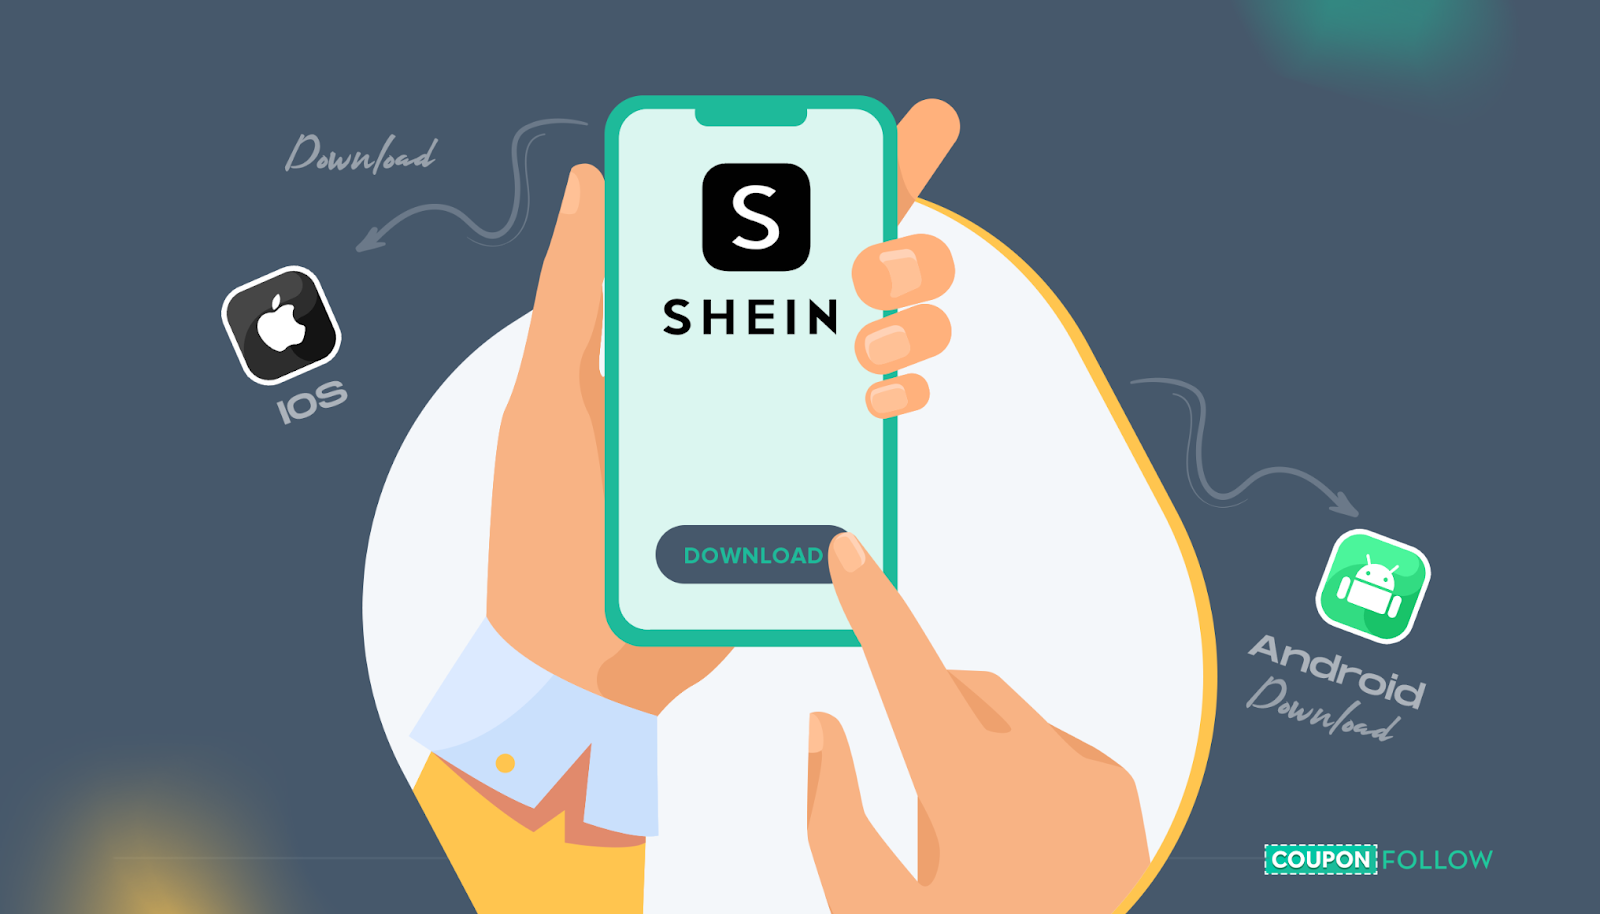 Illustration demonstrating a user downloading the Shein app to their mobile device